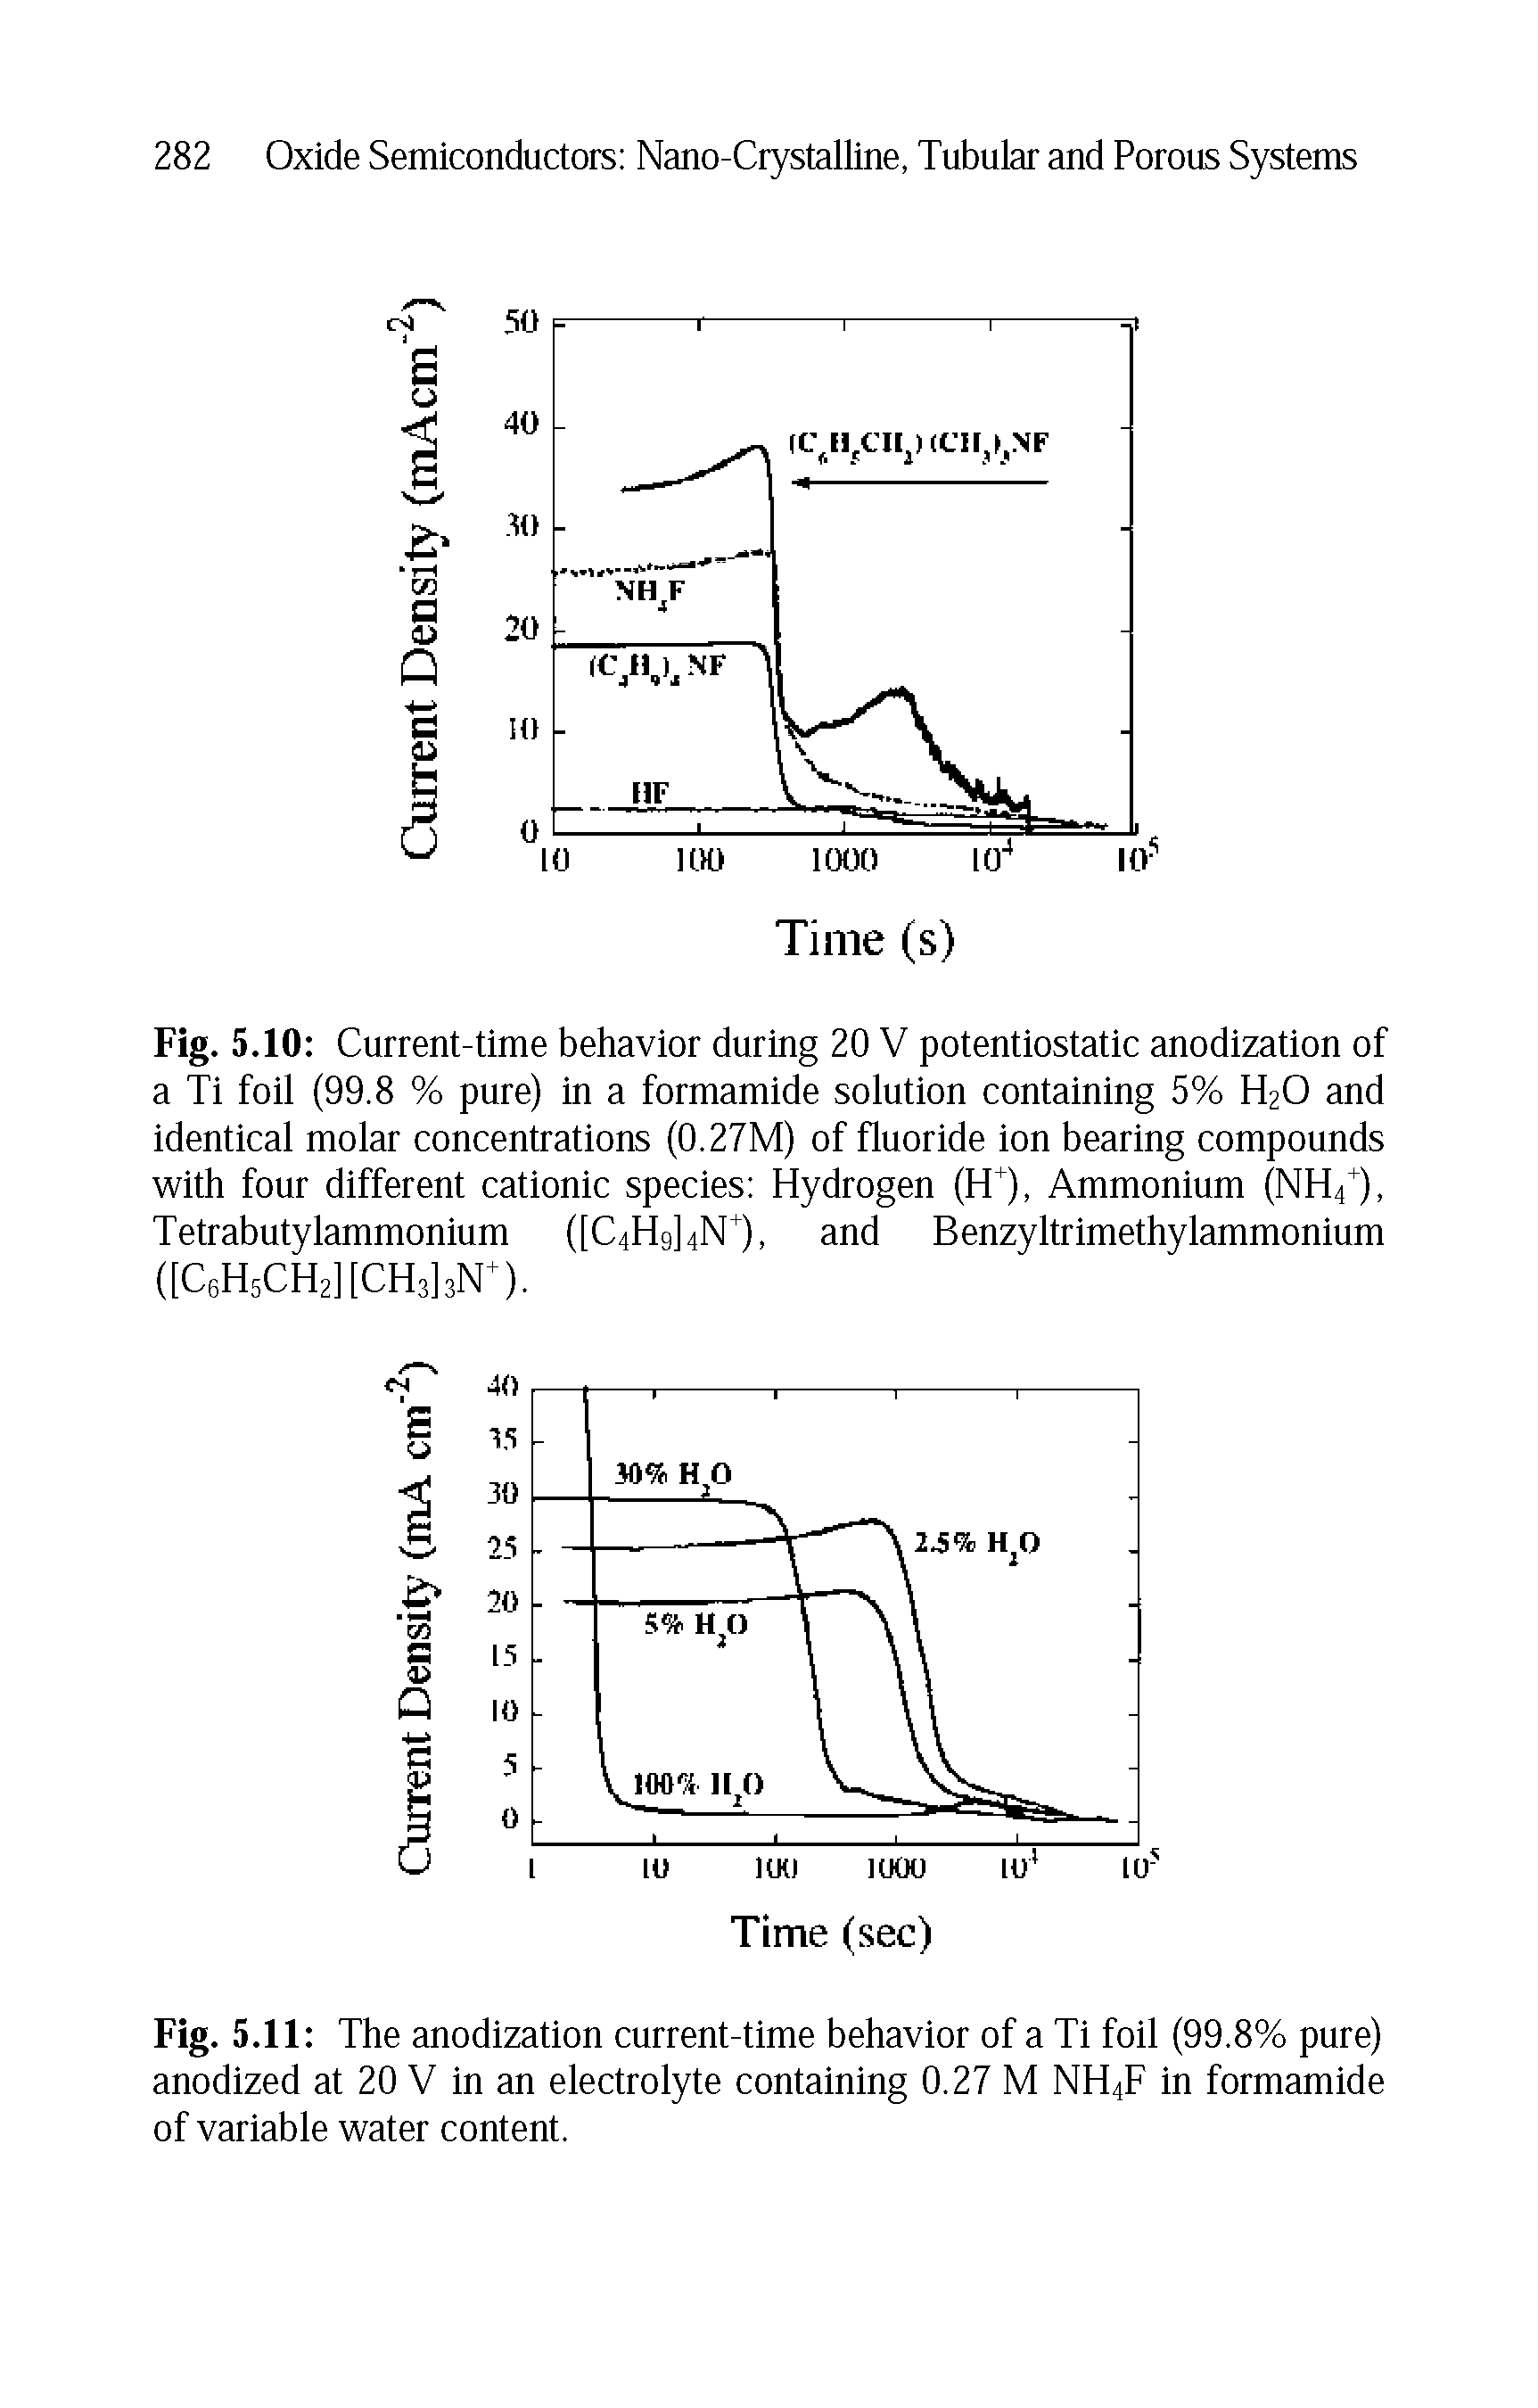 Fig. 5.11 The anodization current-time behavior of a Ti foil (99.8% pure) anodized at 20 V in an electrolyte containing 0.27 M NH4F in formamide of variable water content.